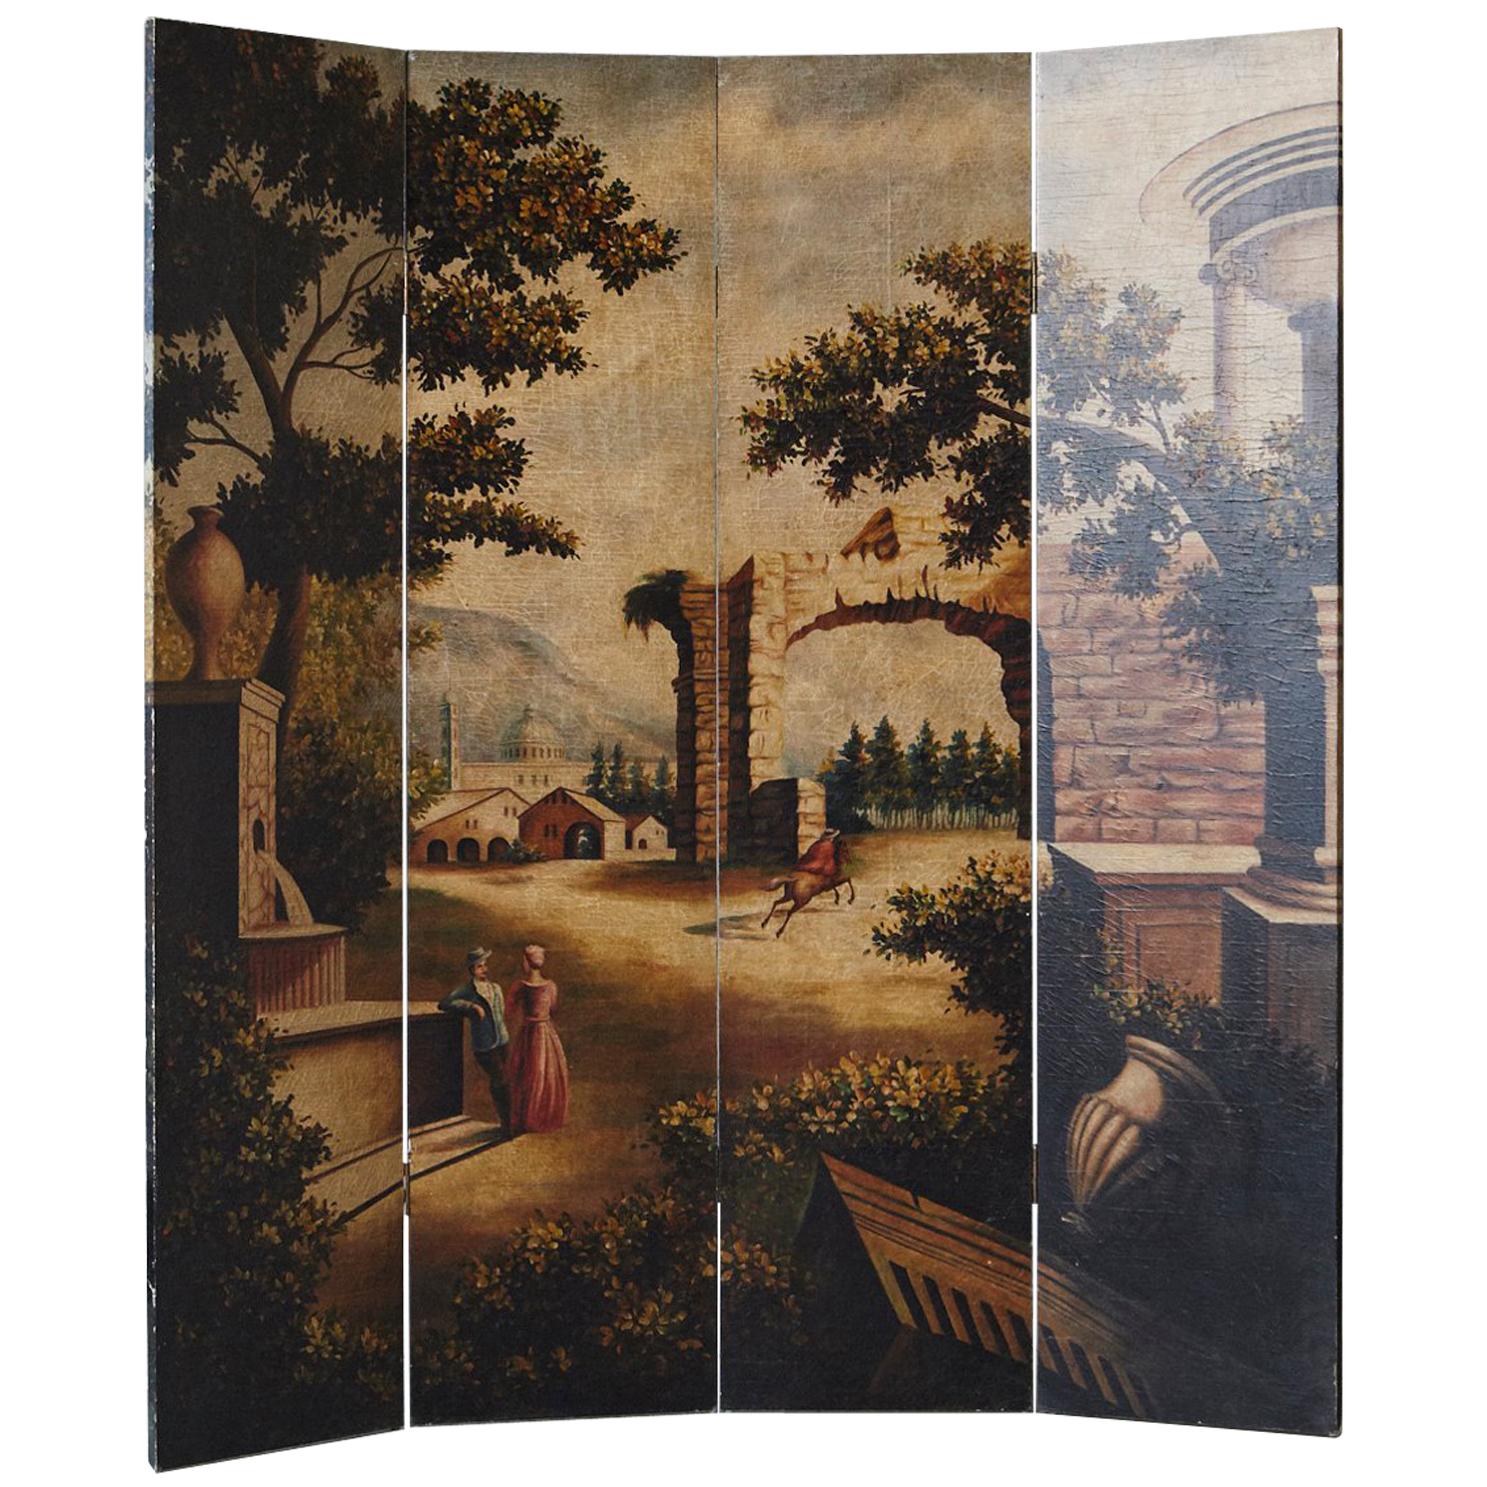 Four Panel Hand-Painted Screen Featuring a Landscape with Architectural Motifs